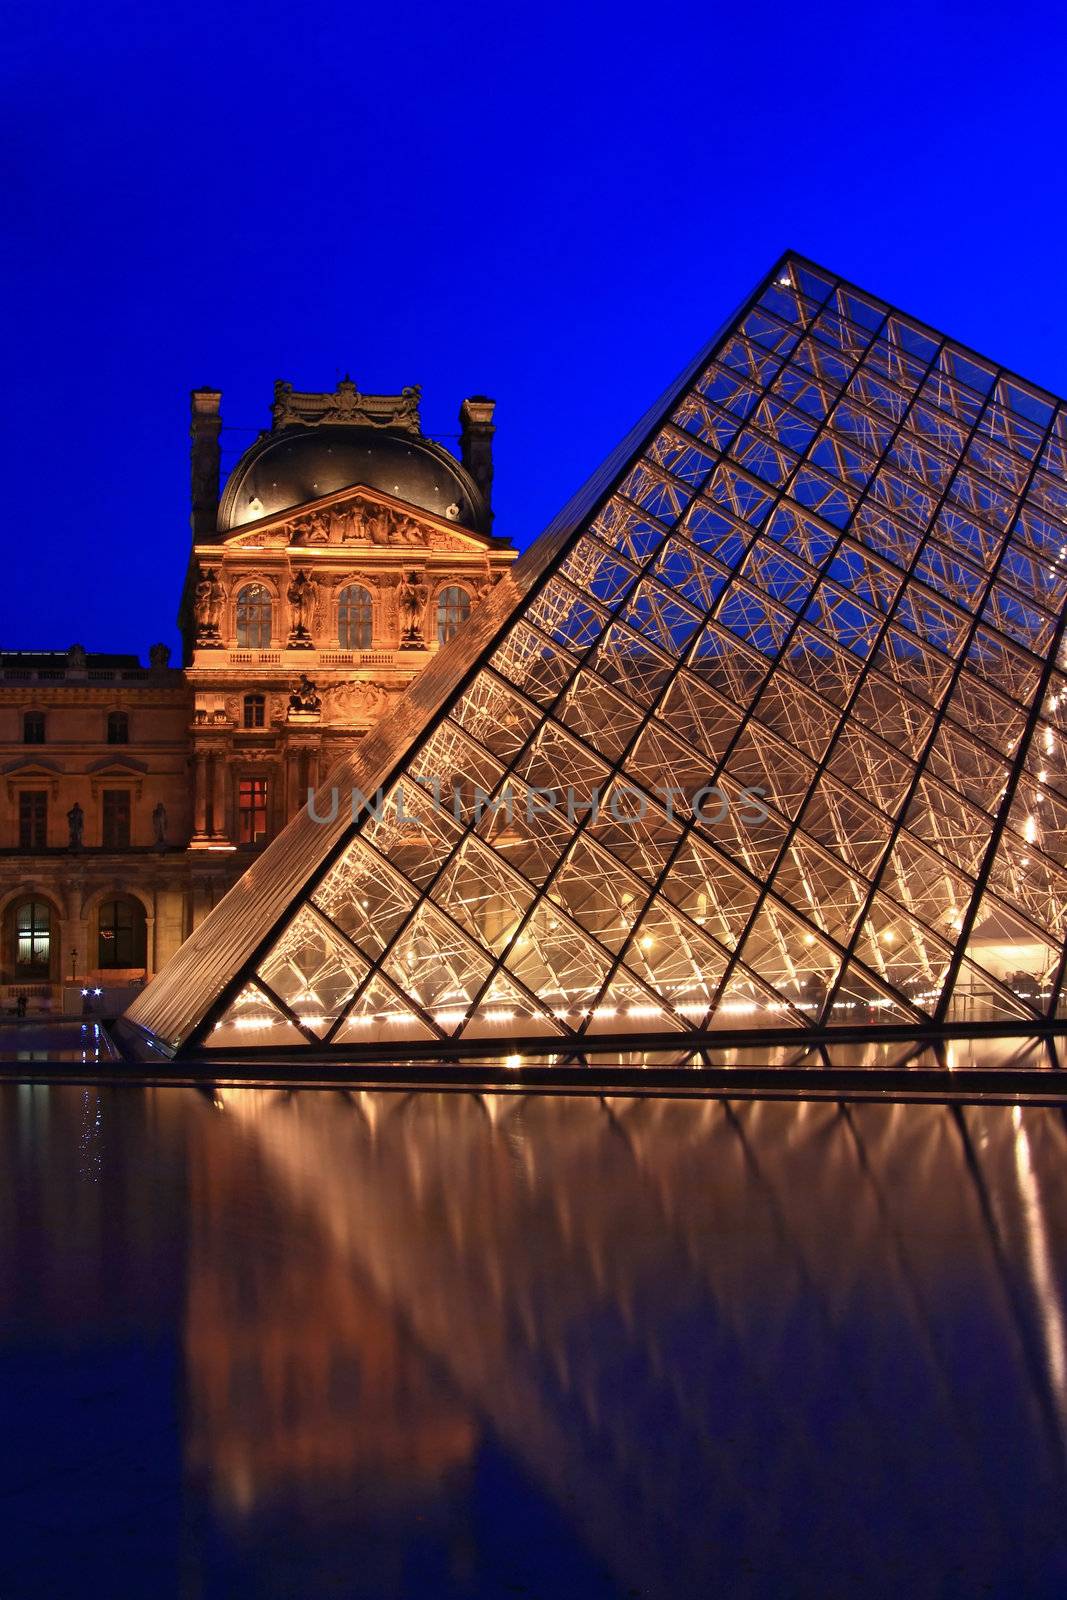 PARIS - APRIL 16: Closeup of Louvre pyramid shines at dusk during the Summer Exhibition April 16, 2010 in Paris. This is one of the most popular tourist destinations in France.